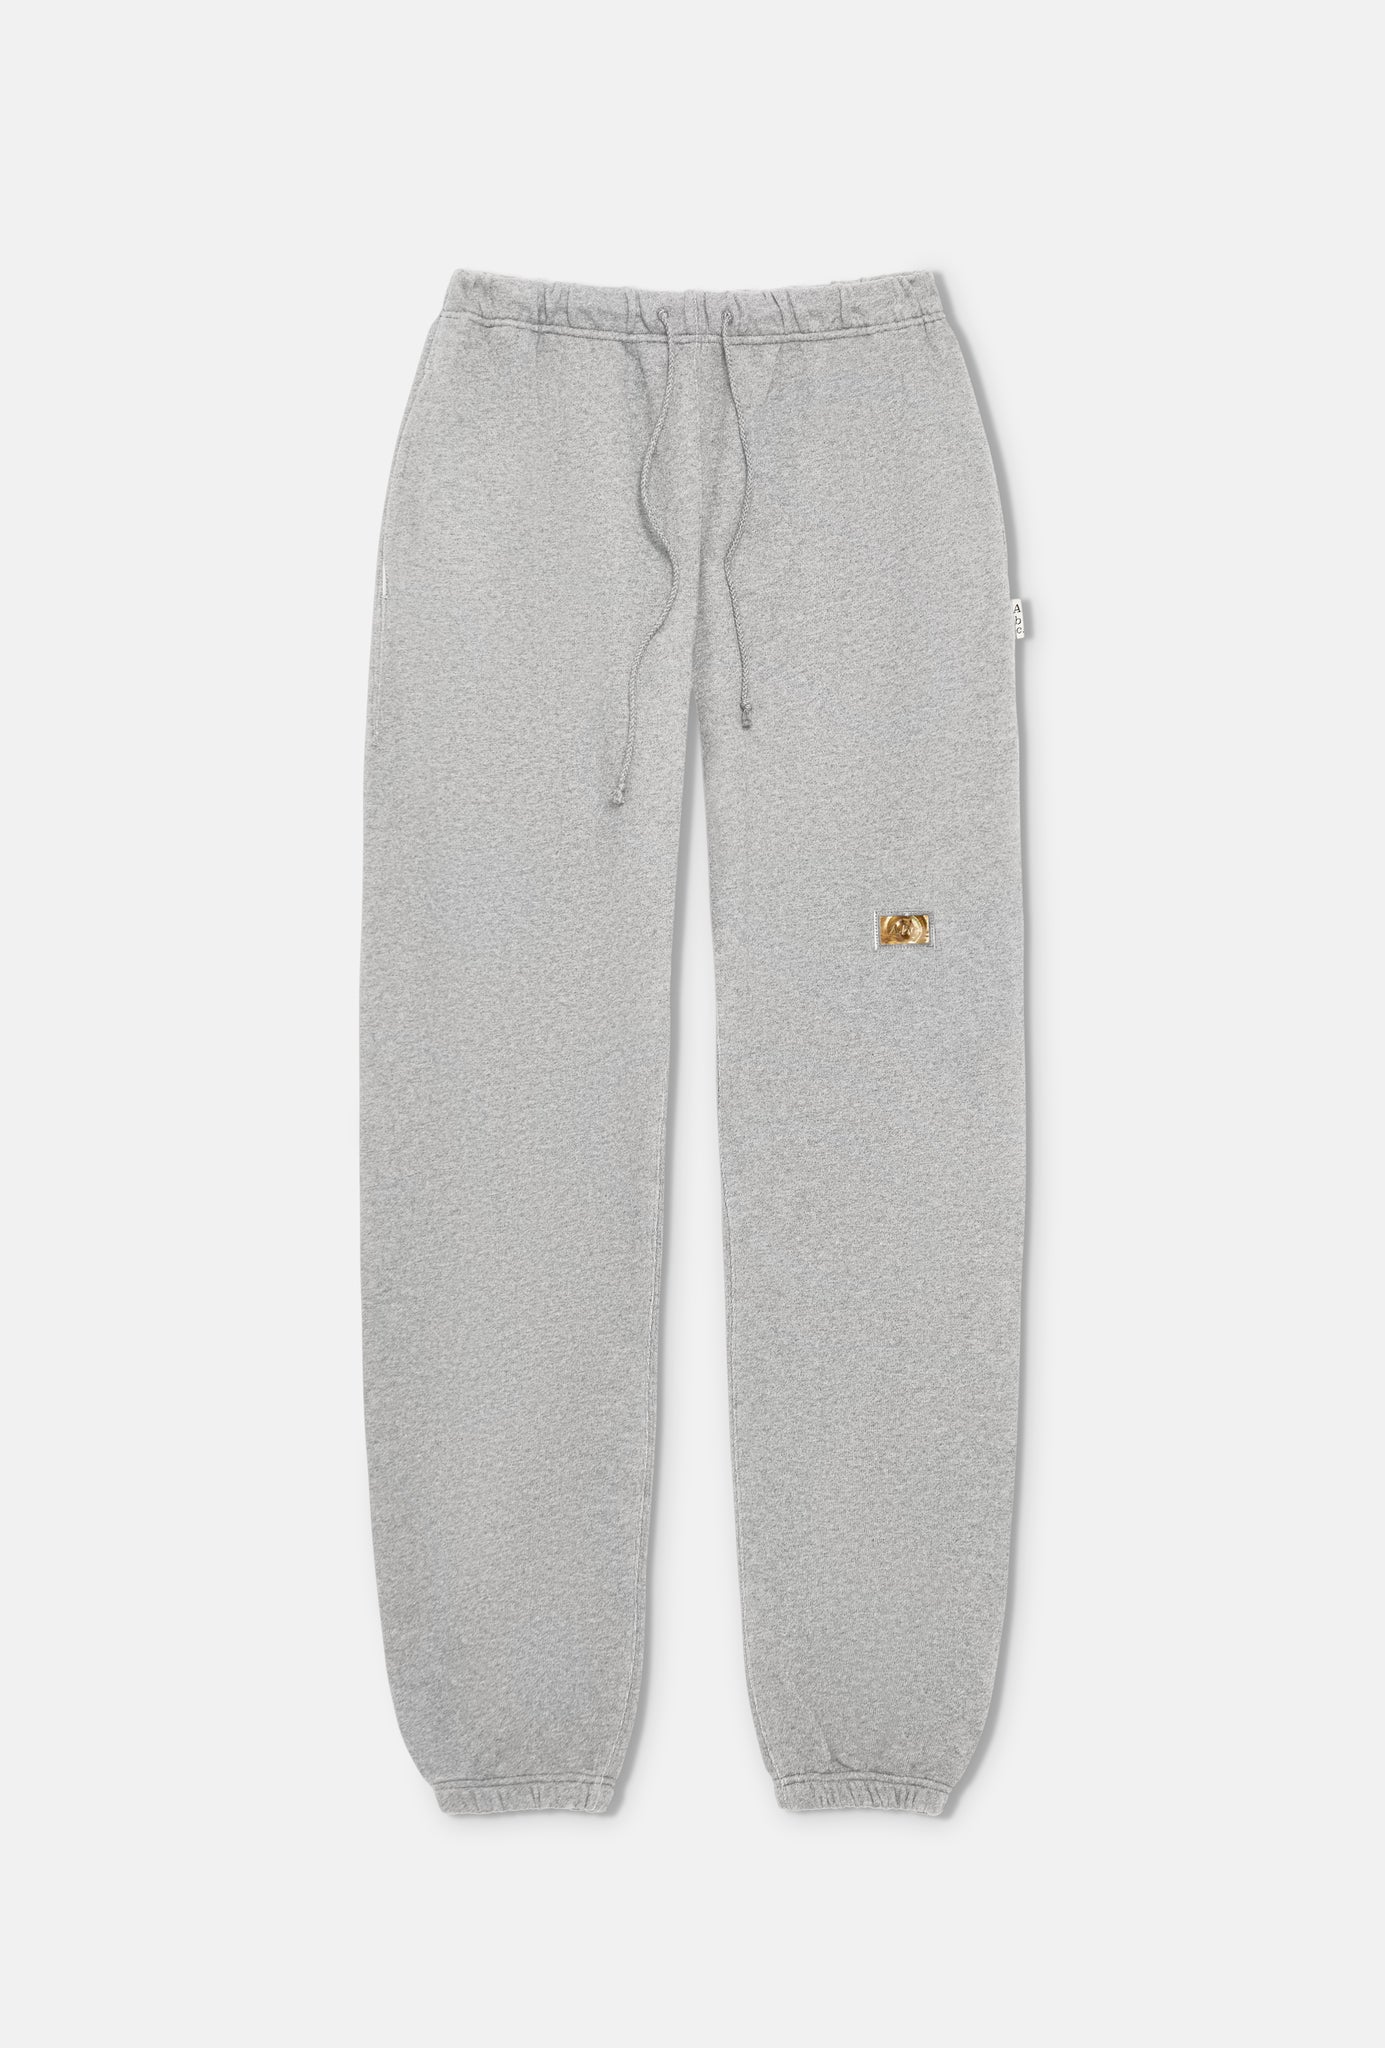 Abc. 123 Hologram French Terry Sweatpants (SS24)- Light Heather Grey